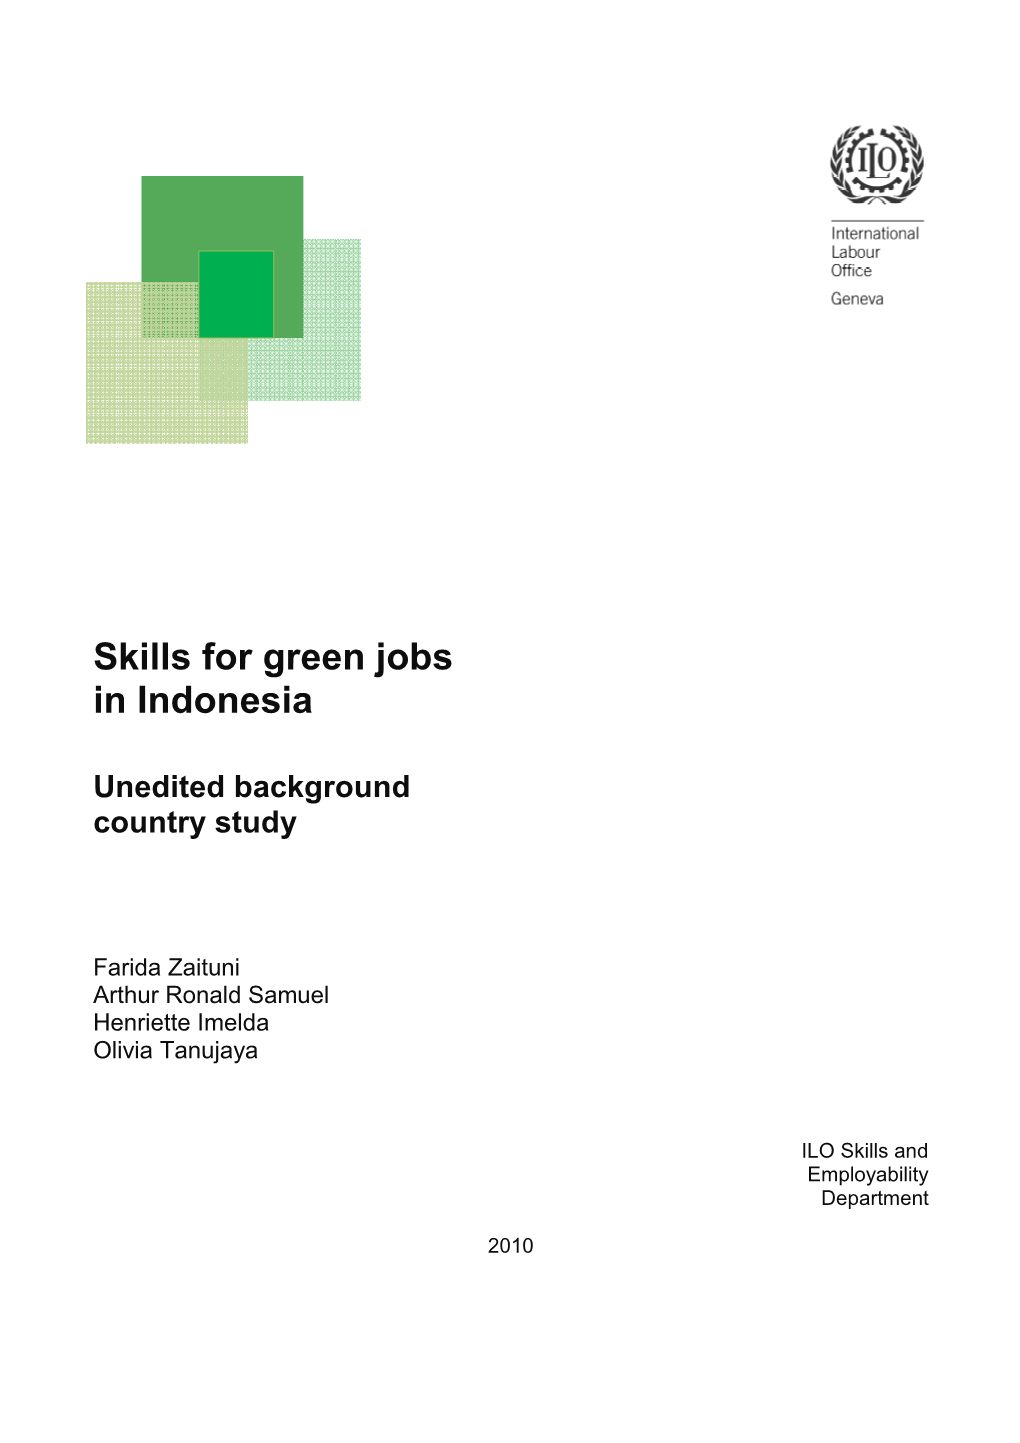 Skills for Green Jobs in Indonesiapdf